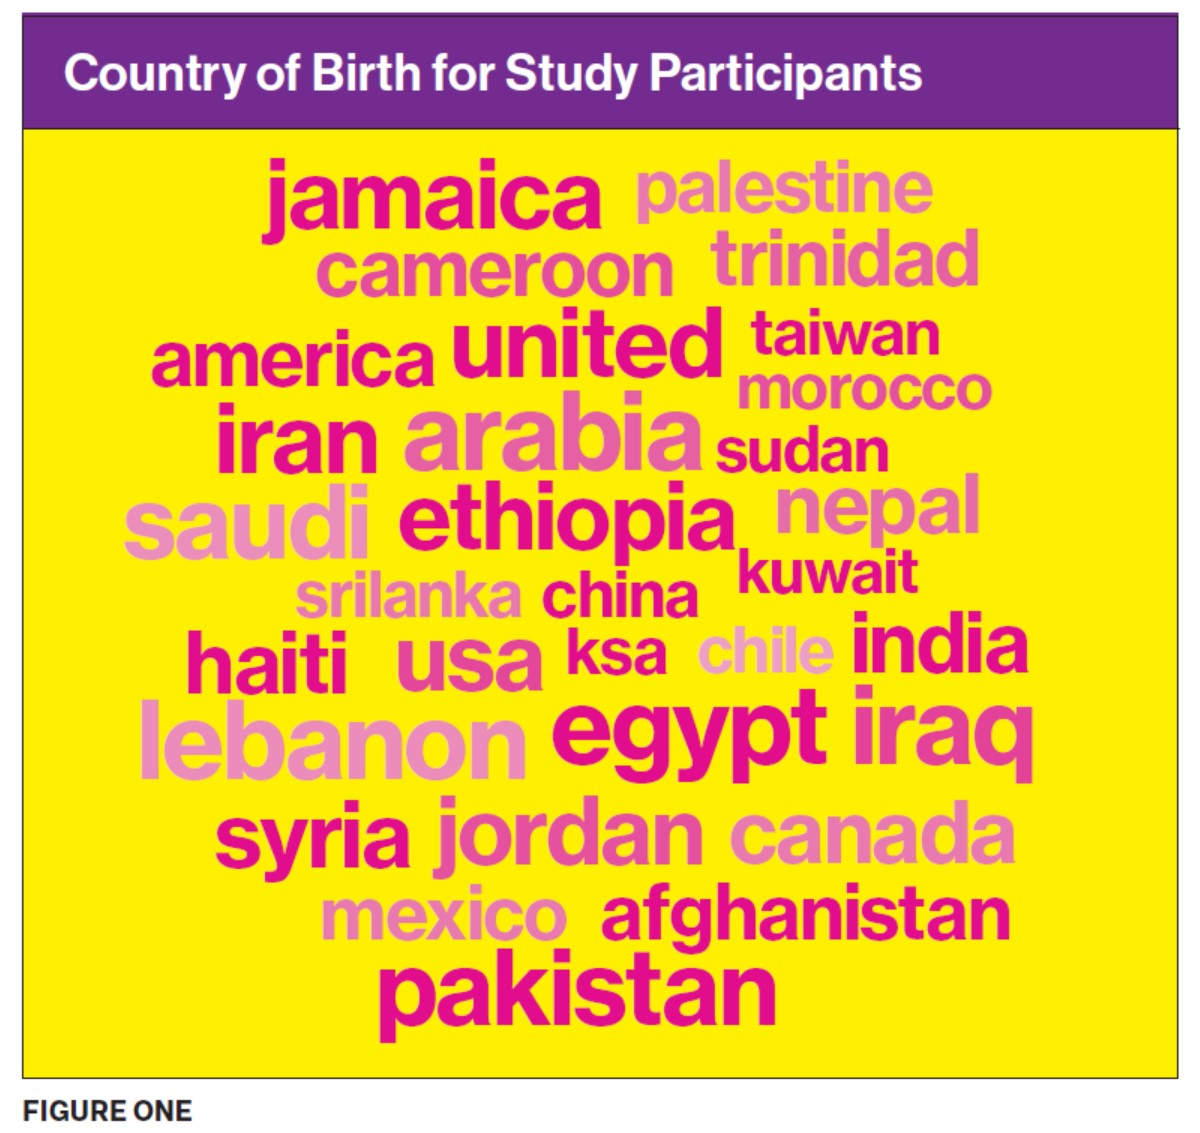 Country of Birth Study Participants